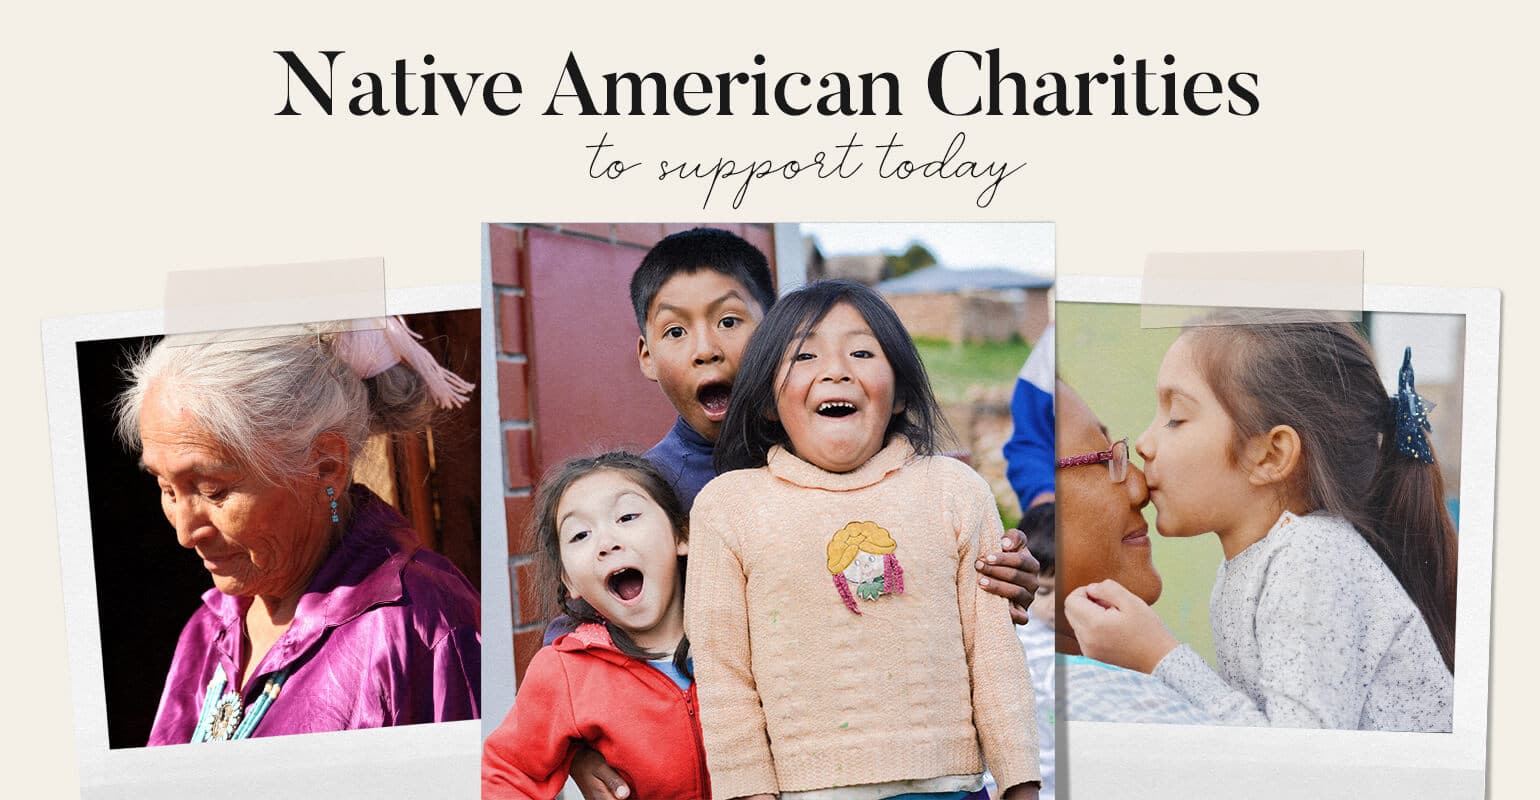 8 Native American Charities to Support Today